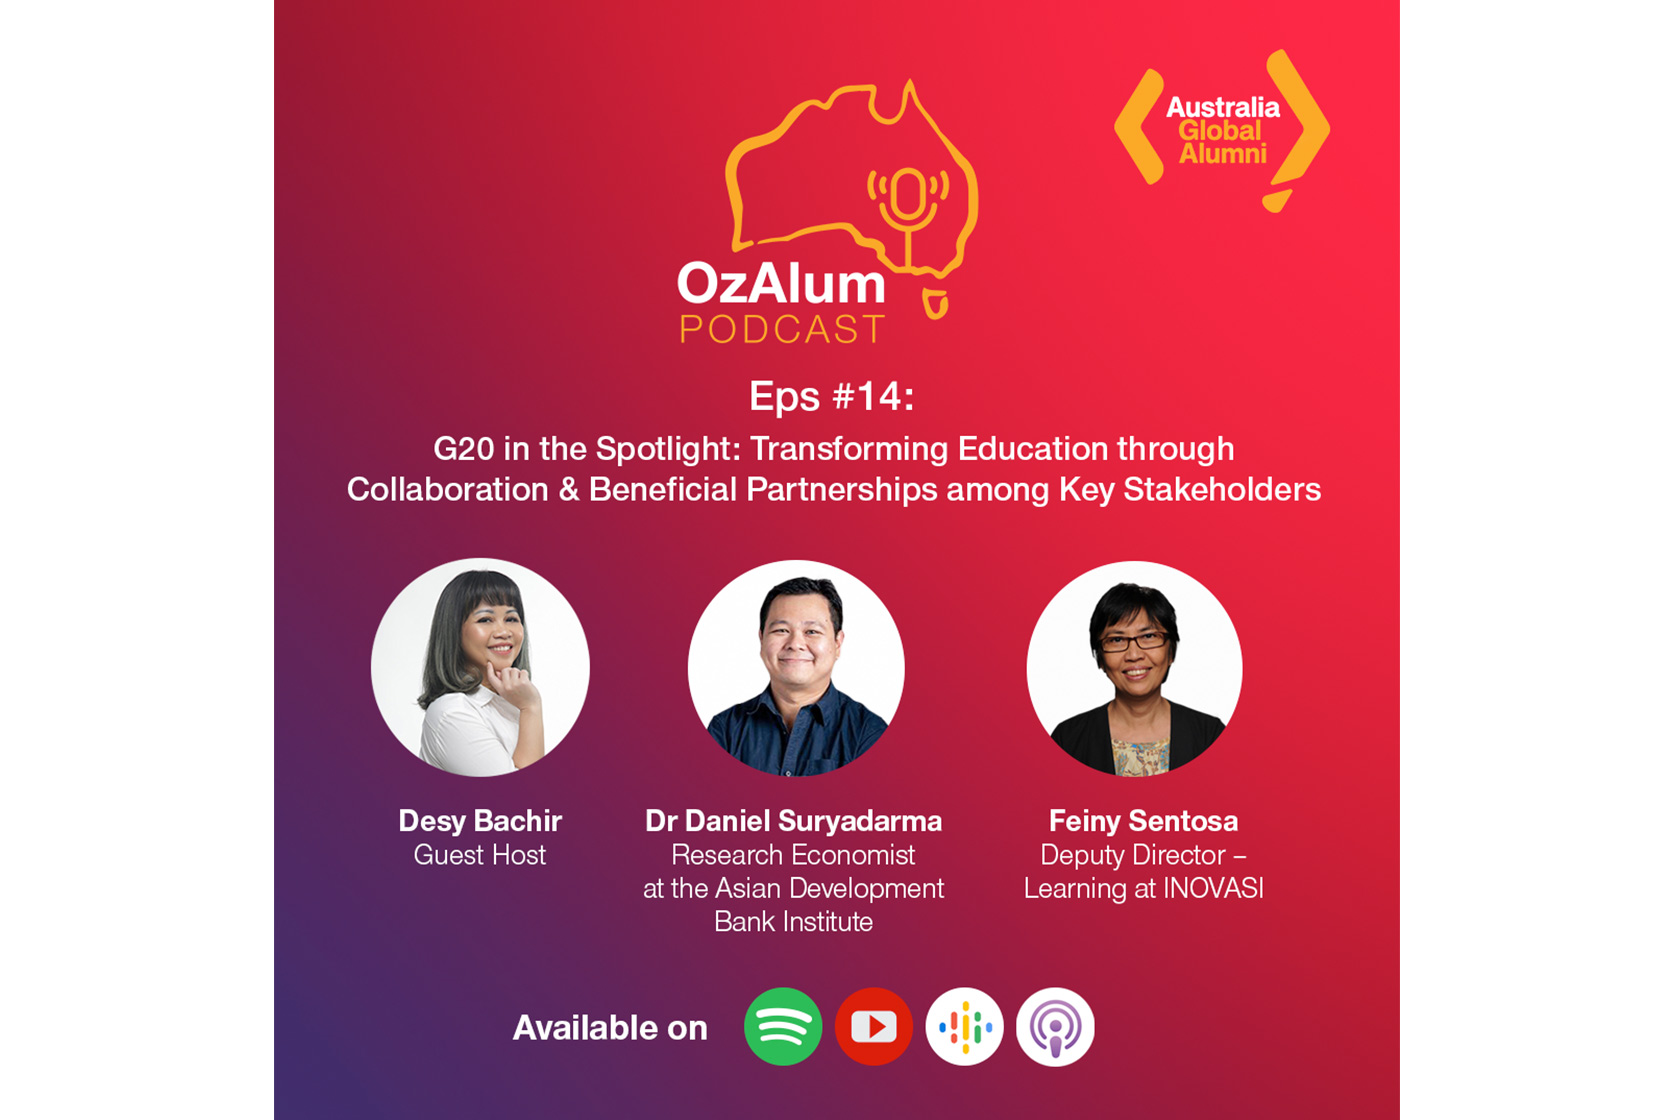 OzAlum Podcast Eps #14: G20 in the Spotlight: Transforming Education through Collaboration & Beneficial Partnerships among Key Stakeholders